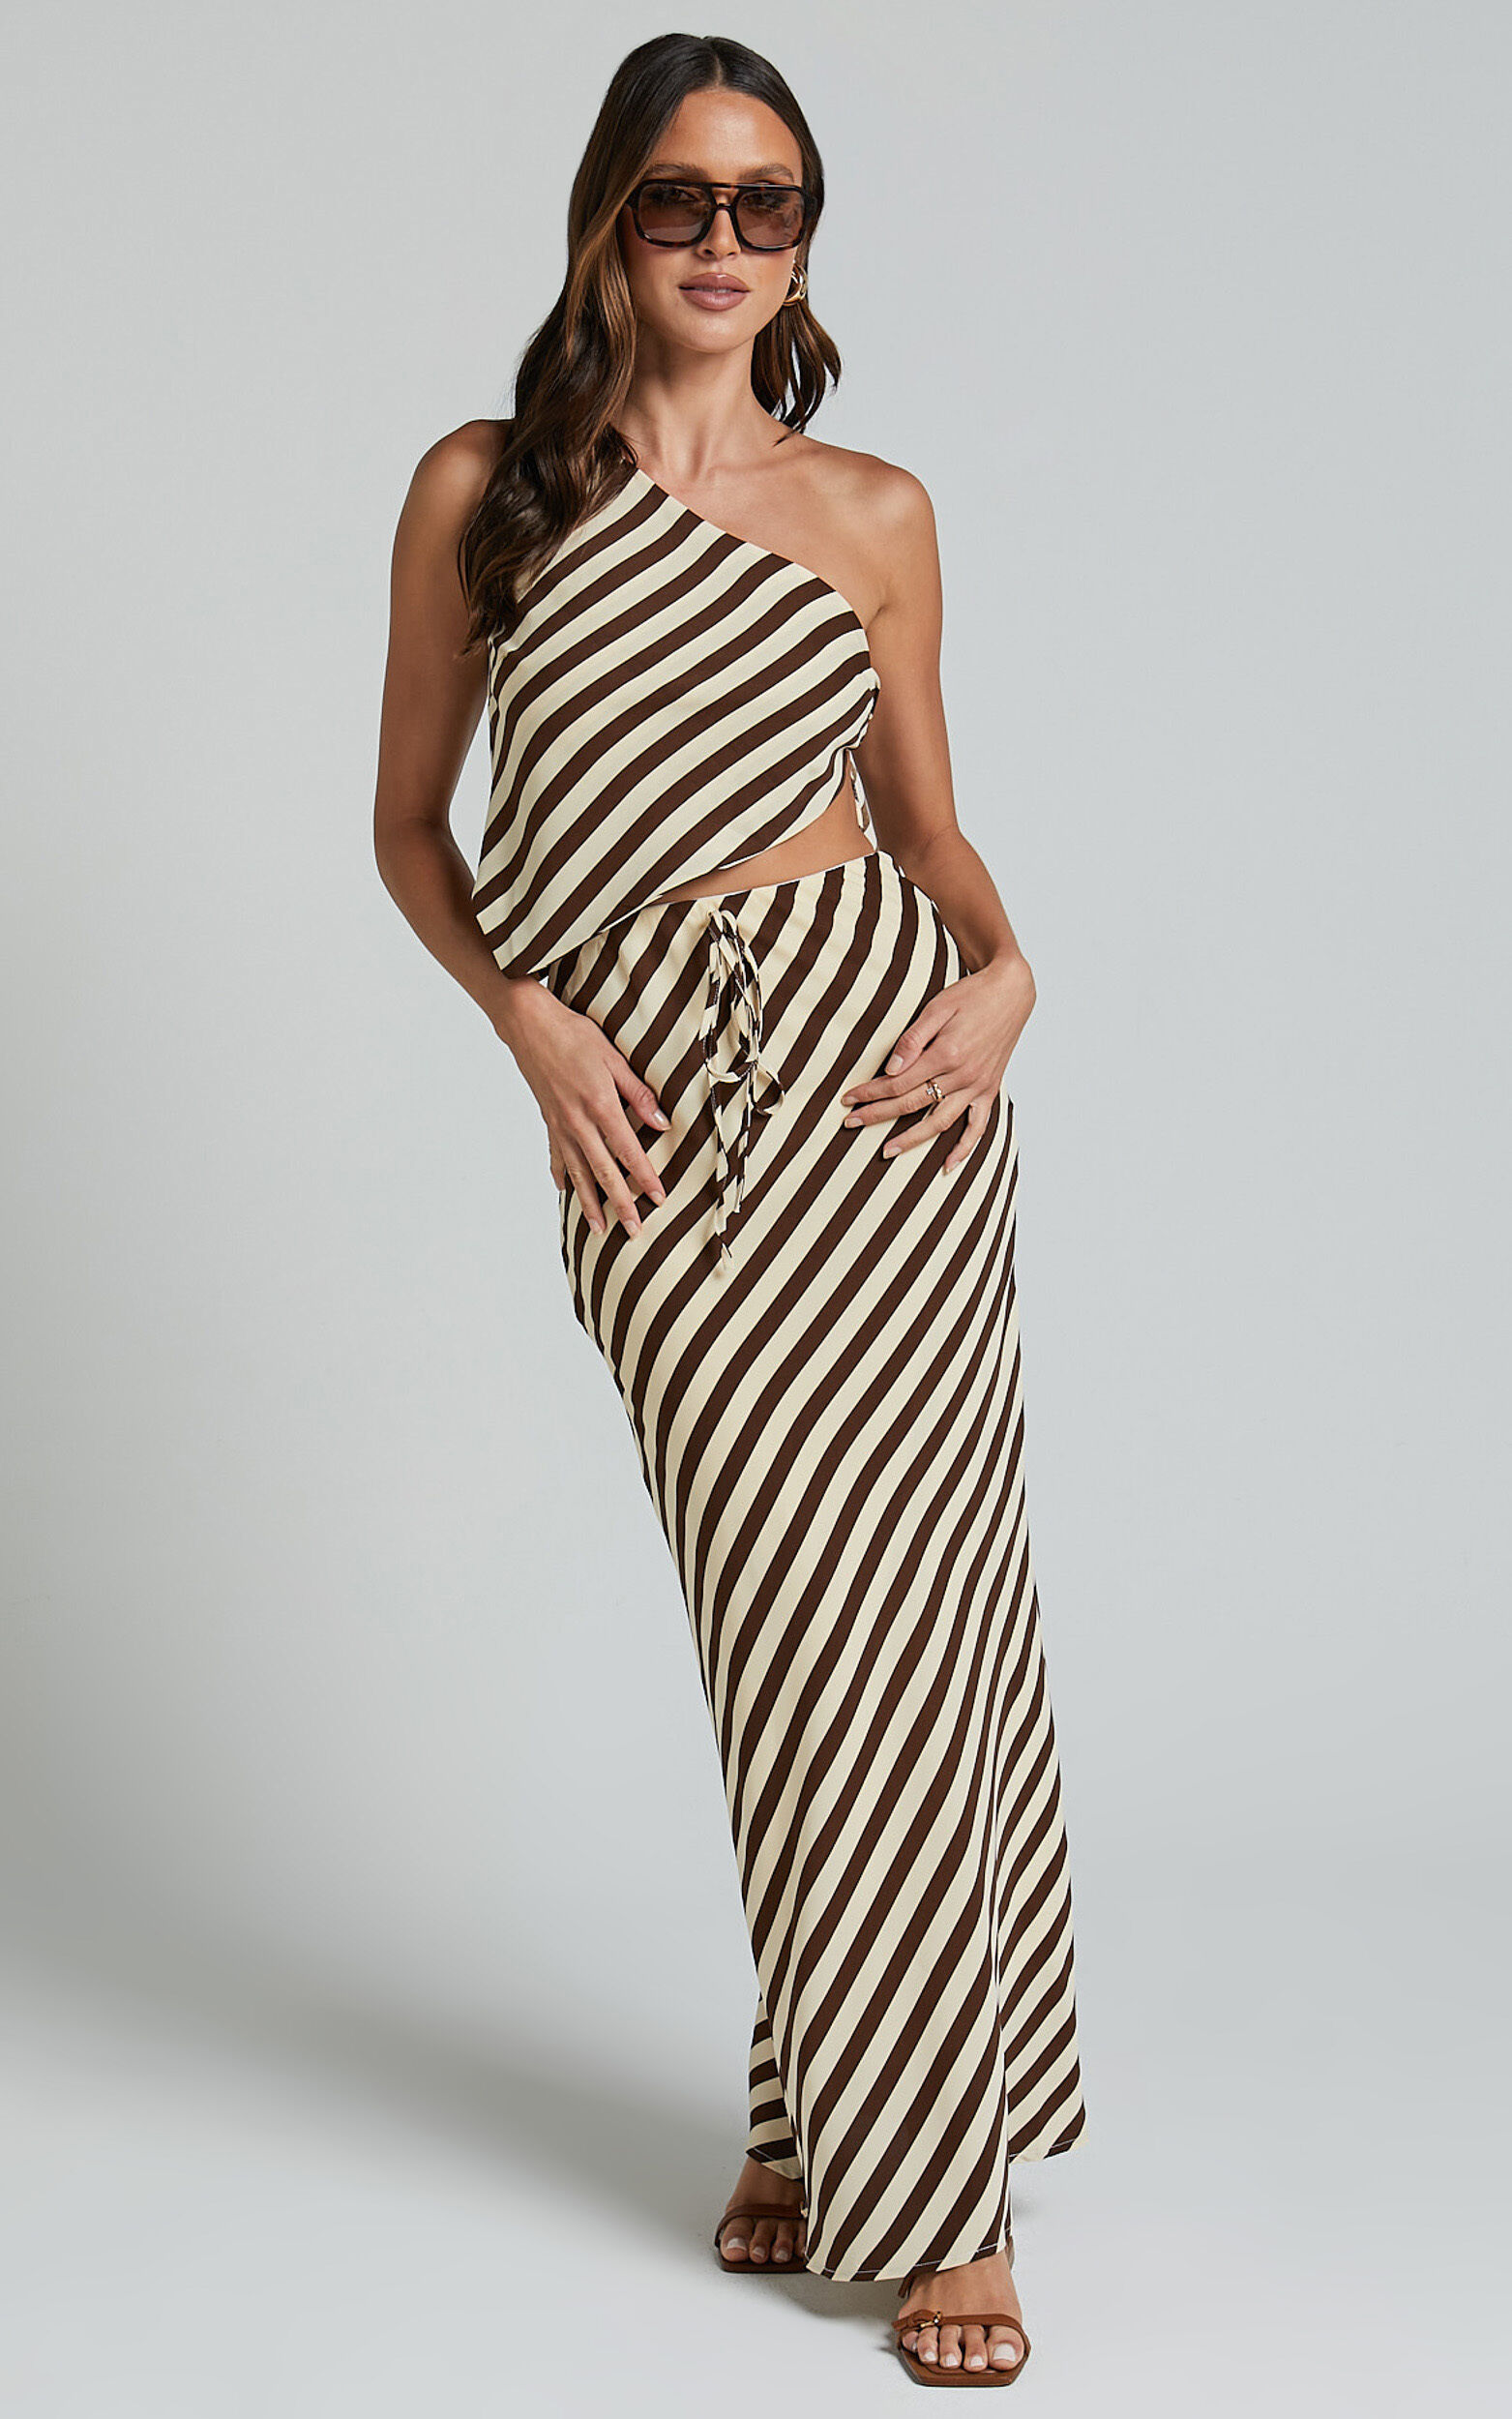 Shandy Two Piece Set - One Shoulder Side Tie Asymmetrical Top and Slip Skirt Set in Chocolate Stripe - 06, BRN1